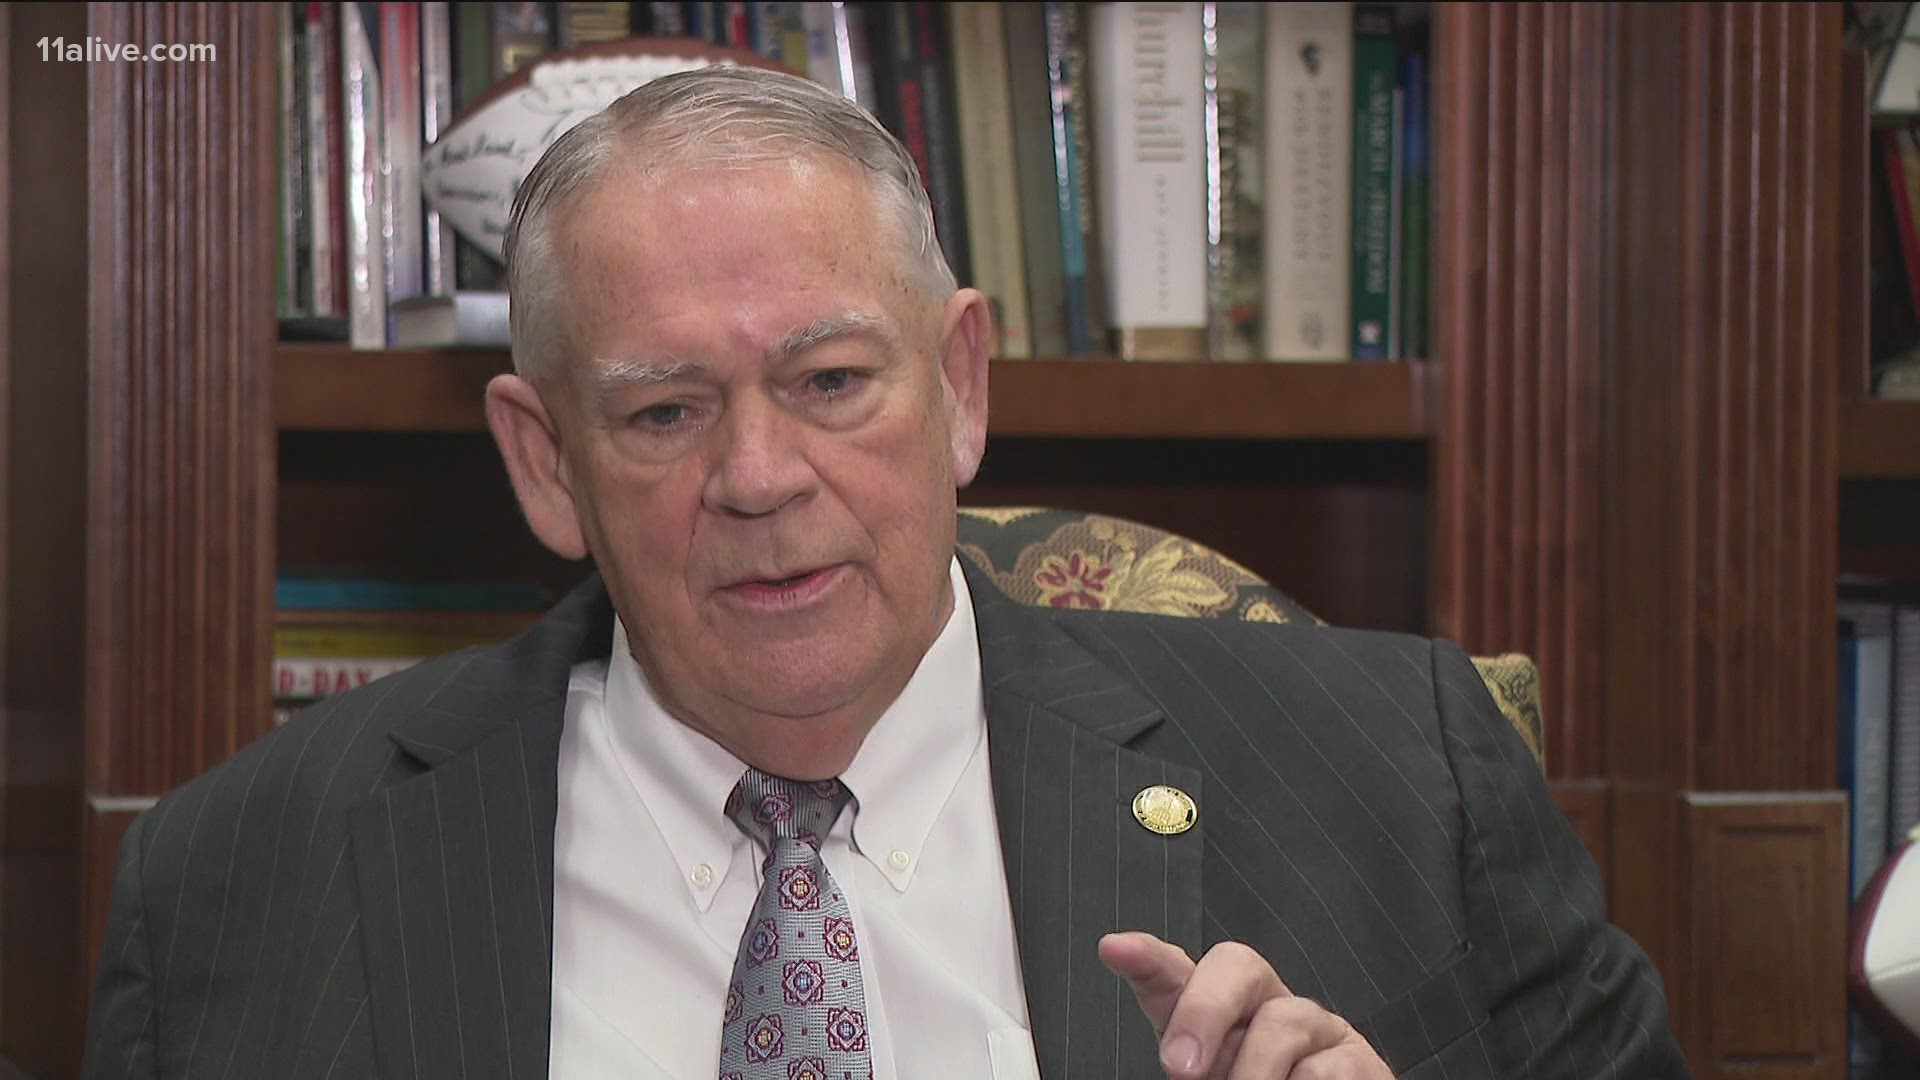 In an exclusive interview with Doug Richards, House speaker David Ralston says he doesn't think that part of the bill will make it through the Georgia House.